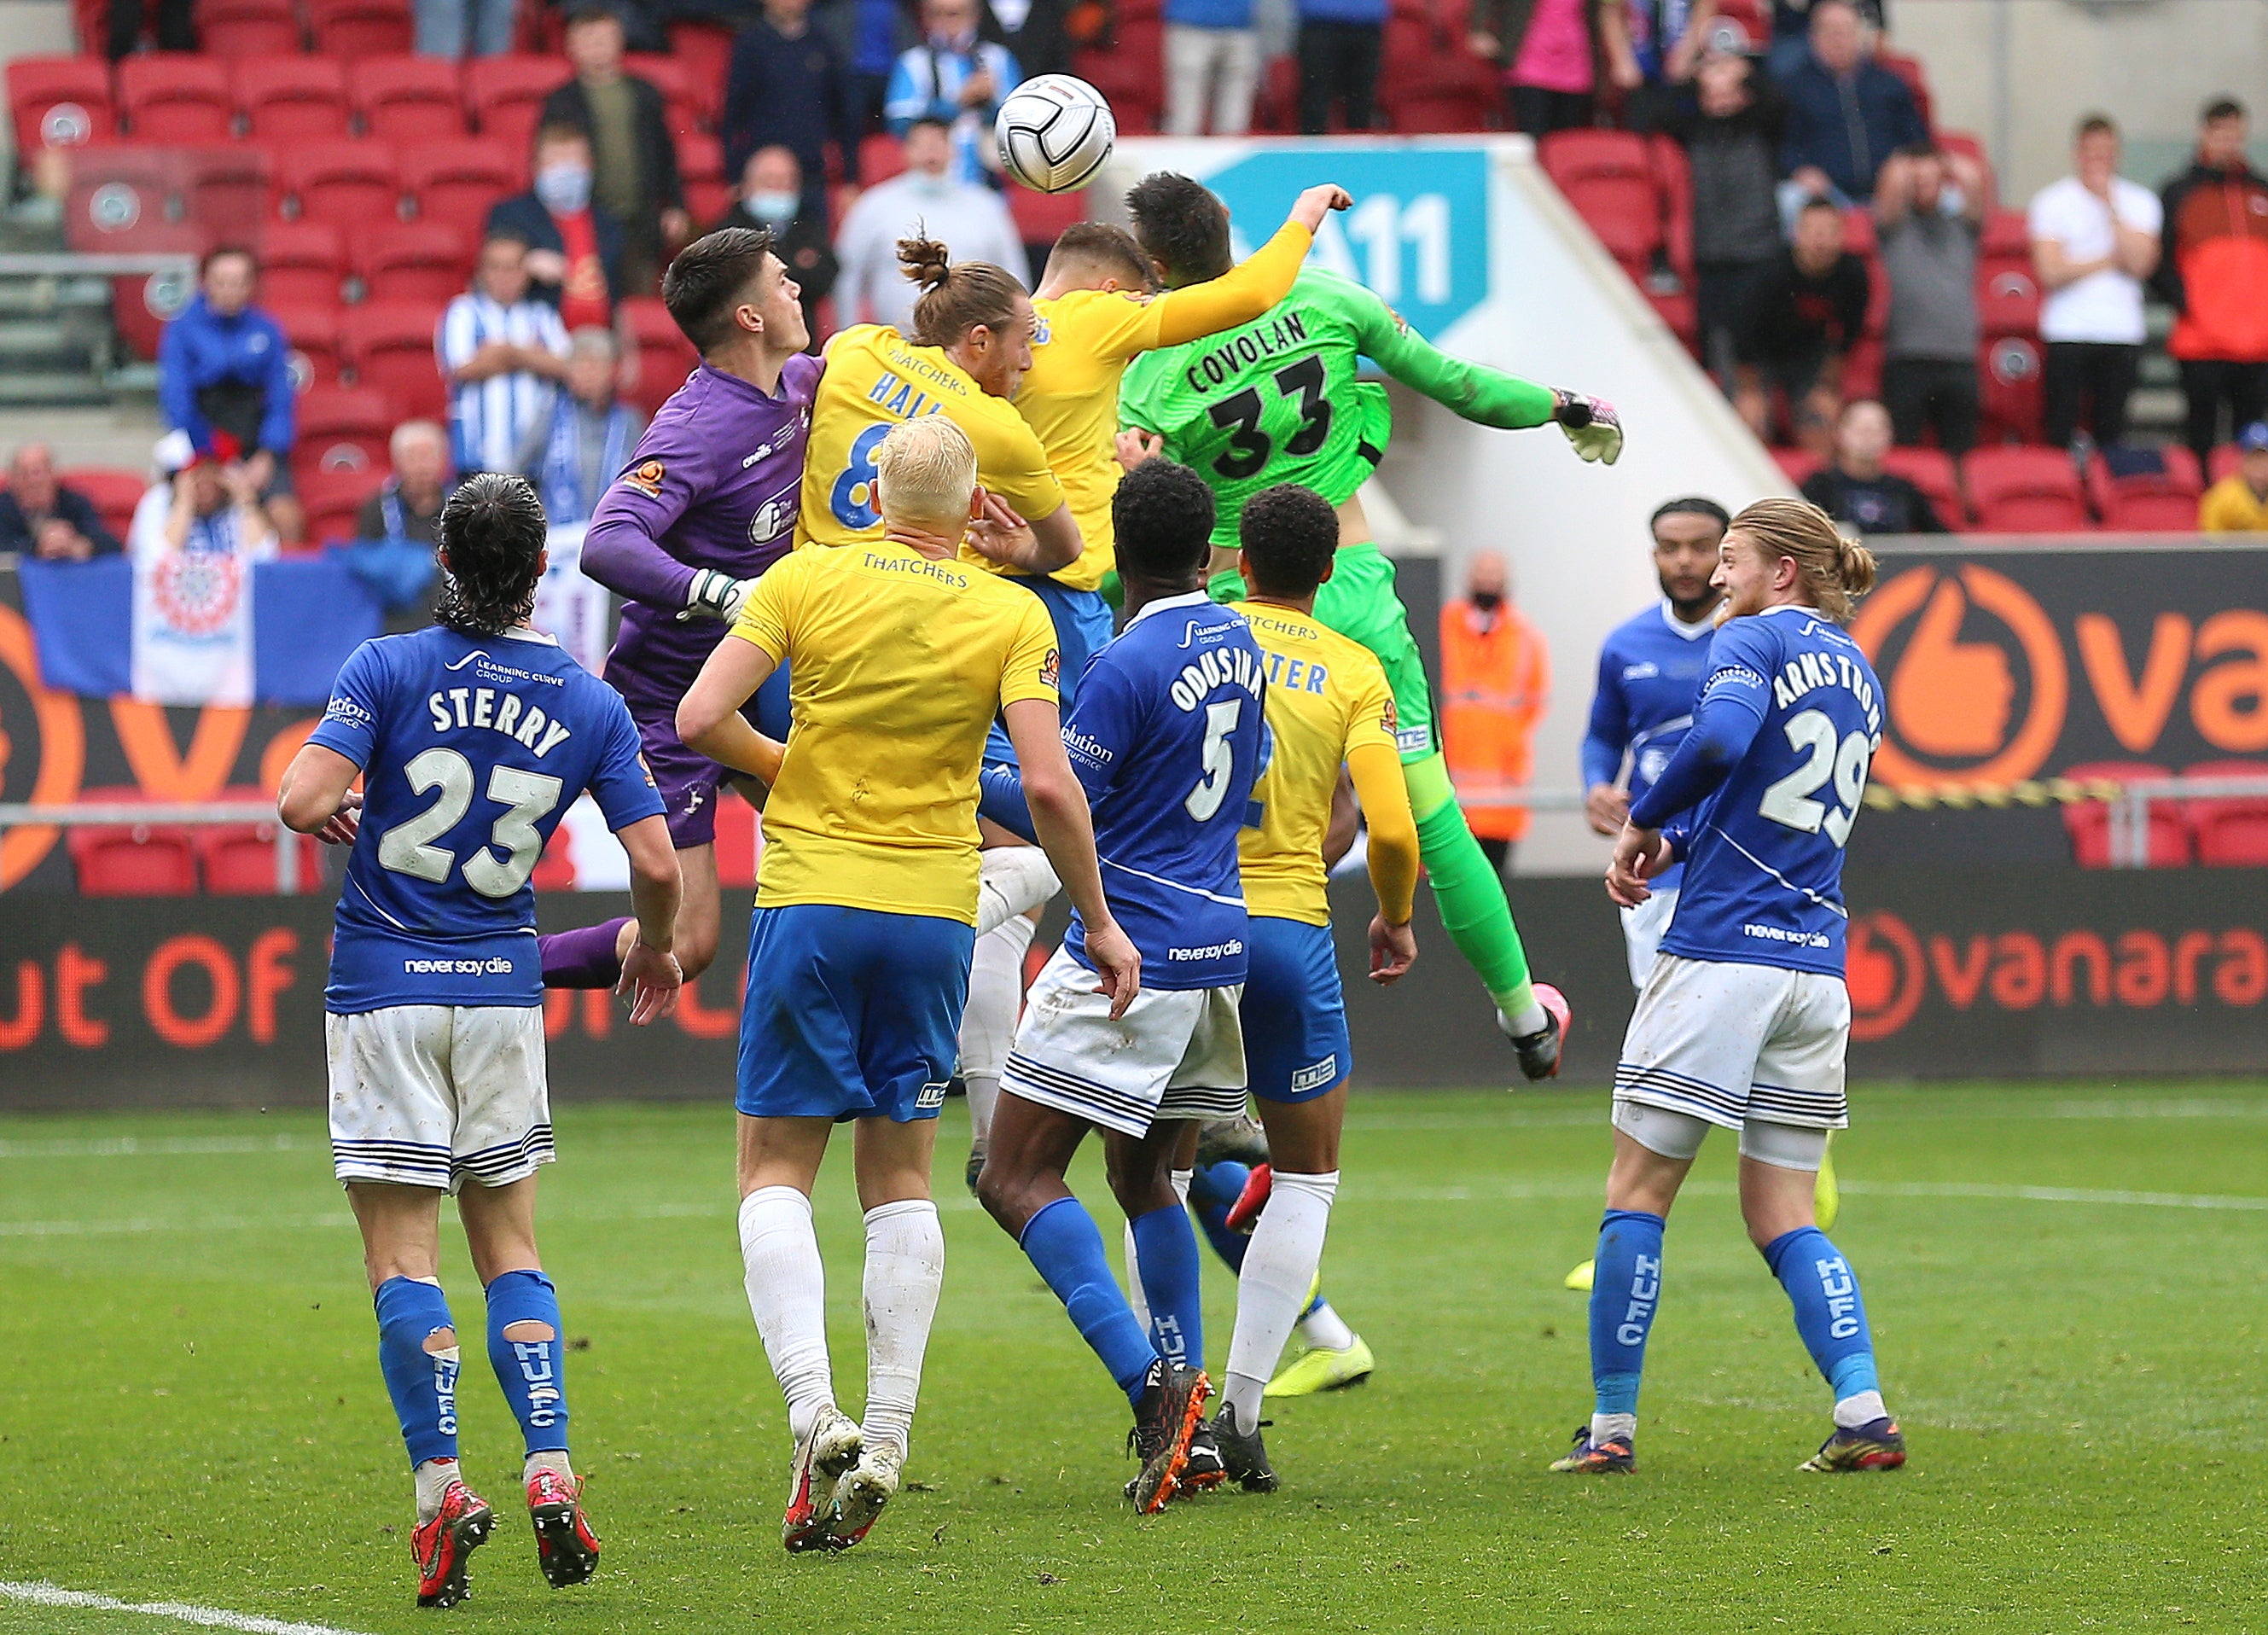 Torquay goalkeeper Lucas Covolan scored a late equaliser in stoppage time at Ashton Gate